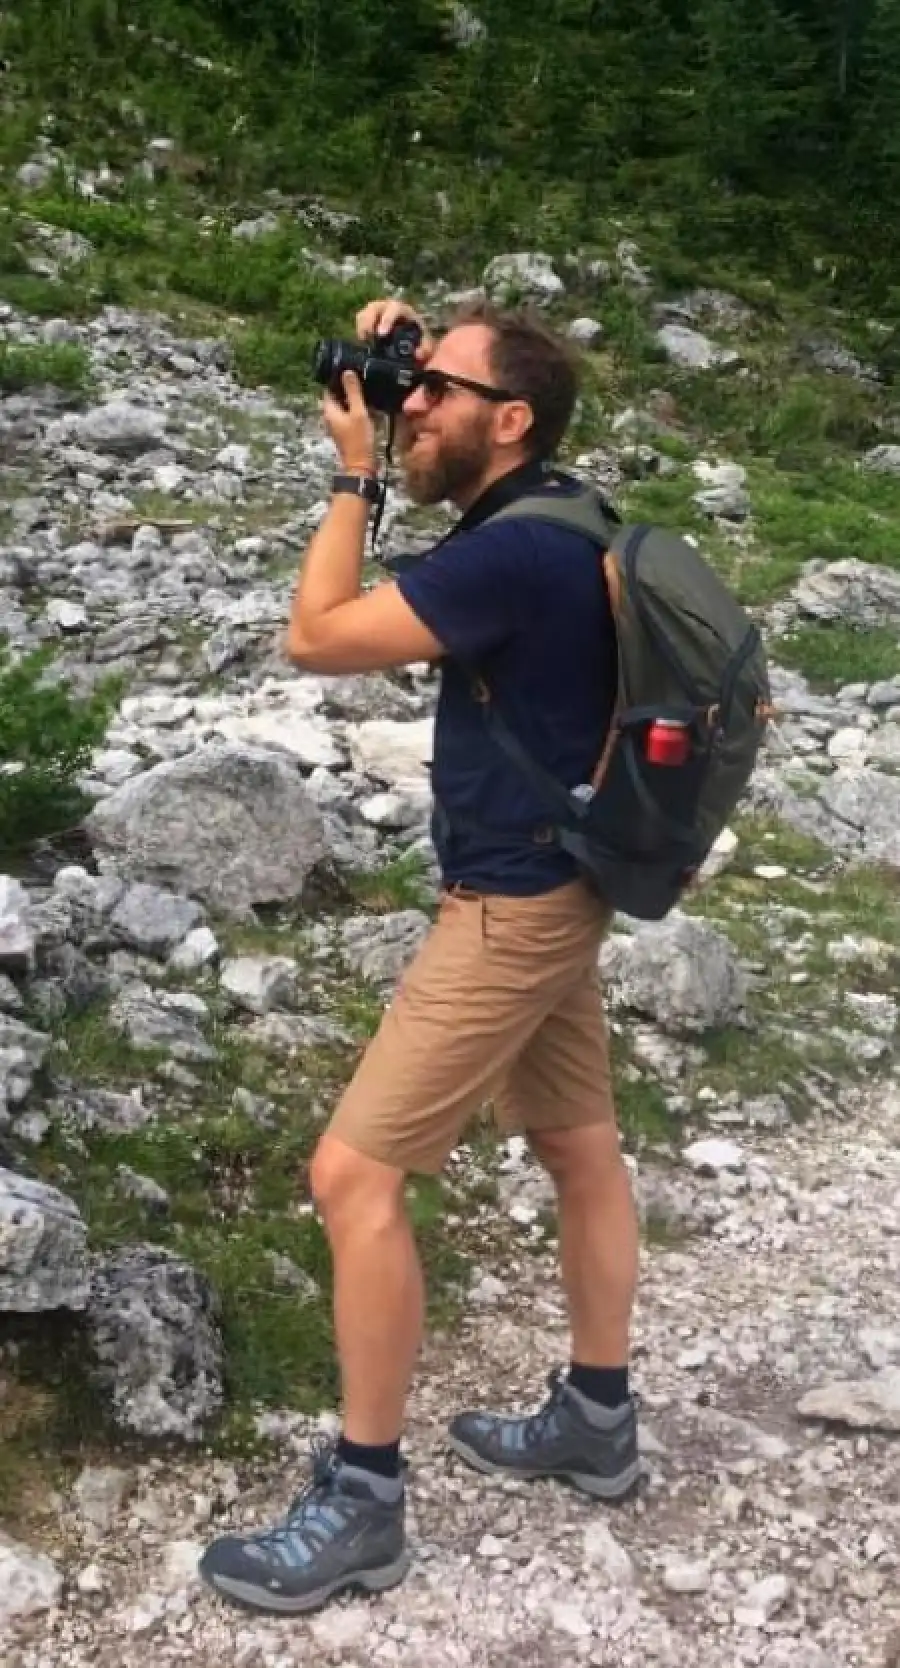 Taking a photo while hiking in the mountains